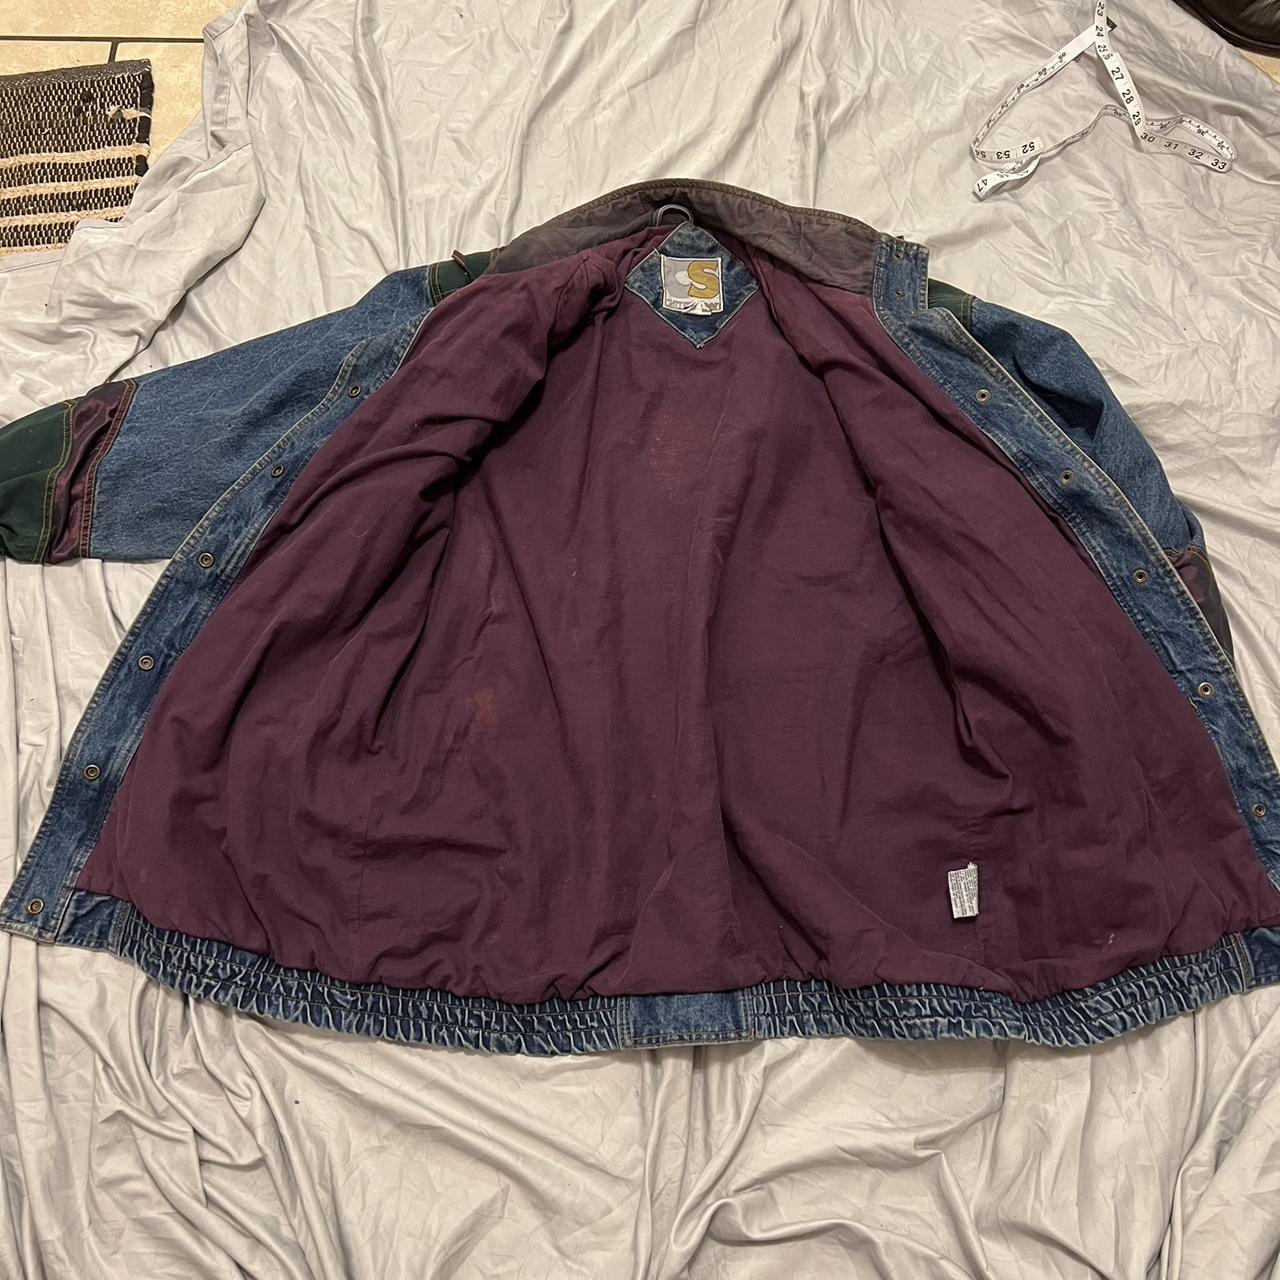 Current Seen Women's Navy and Burgundy Jacket (5)